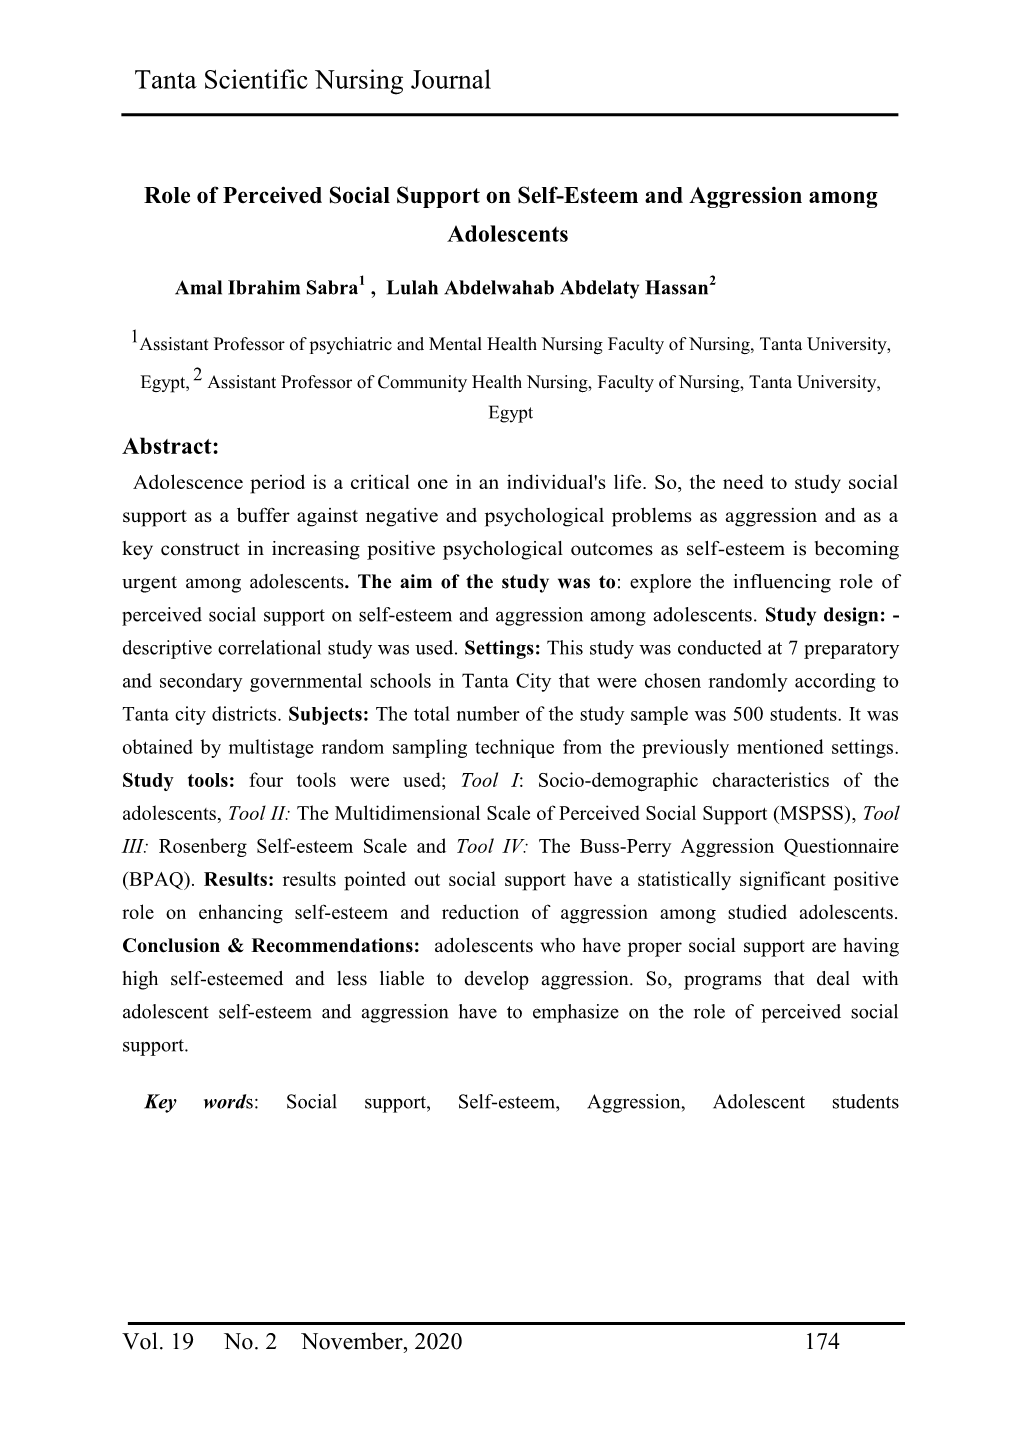 Role of Perceived Social Support on Self-Esteem and Aggression Among Adolescents